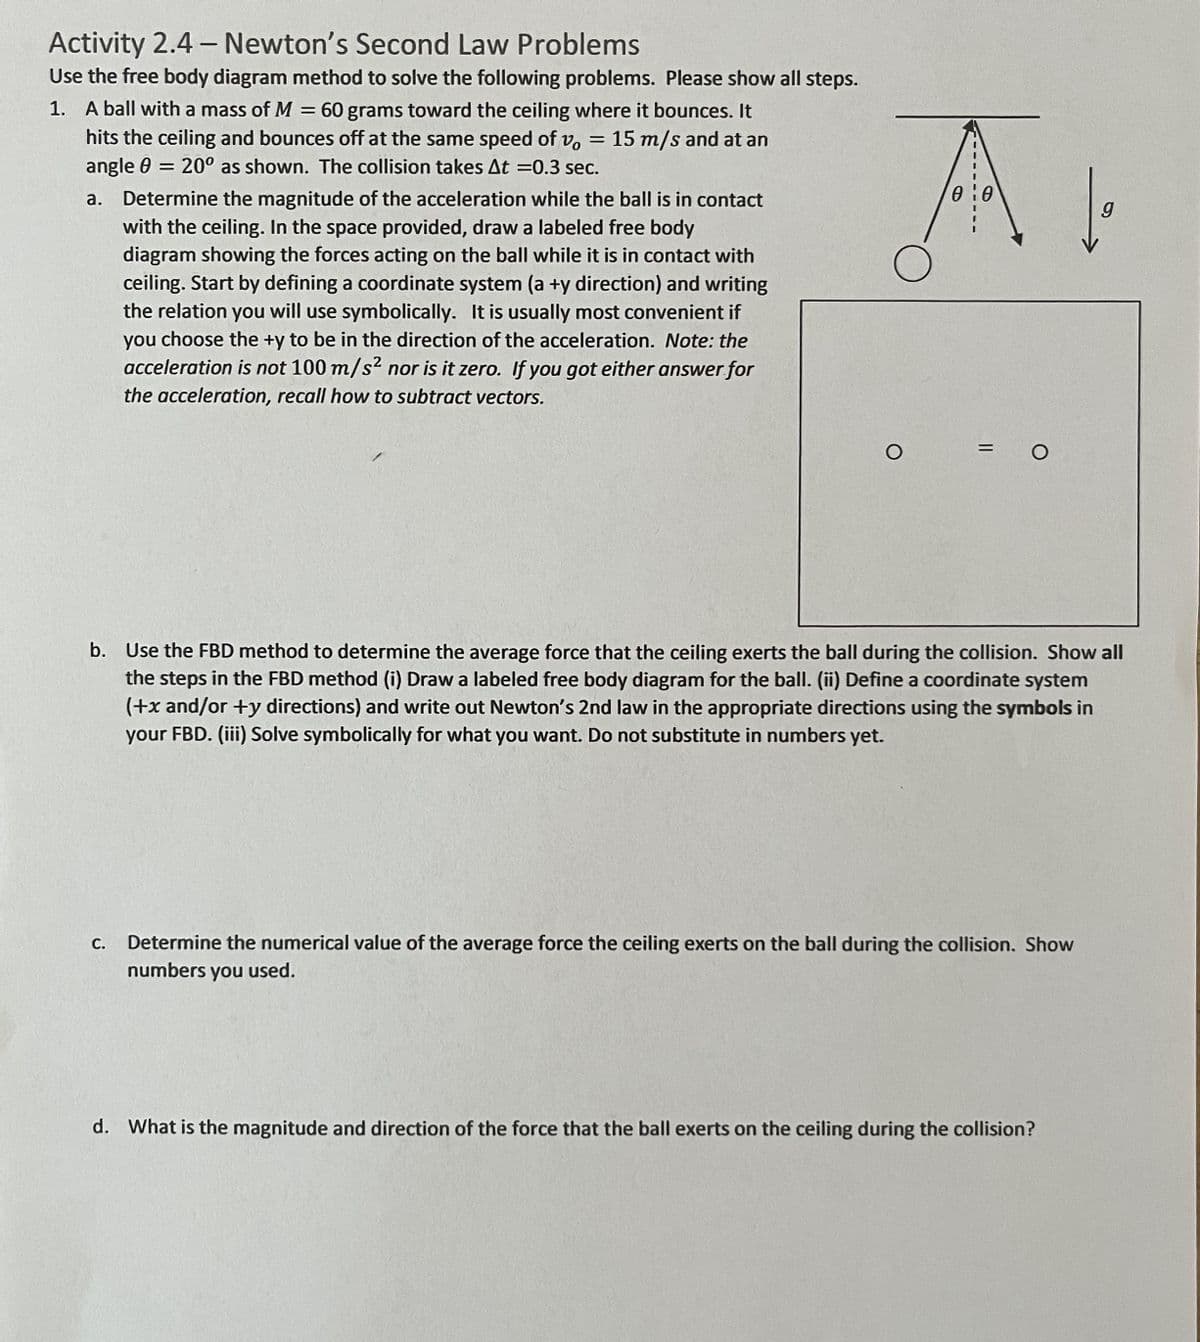 Activity 2.4- Newton's Second Law Problems
Use the free body diagram method to solve the following problems. Please show all steps.
1. A ball with a mass of M = 60 grams toward the ceiling where it bounces. It
hits the ceiling and bounces off at the same speed of v, 15 m/s and at an
angle = 20° as shown. The collision takes At =0.3 sec.
=
a. Determine the magnitude of the acceleration while the ball is in contact
with the ceiling. In the space provided, draw a labeled free body
diagram showing the forces acting on the ball while it is in contact with
ceiling. Start by defining a coordinate system (a +y direction) and writing
the relation you will use symbolically. It is usually most convenient if
you choose the +y to be in the direction of the acceleration. Note: the
acceleration is not 100 m/s² nor is it zero. If you got either answer for
the acceleration, recall how to subtract vectors.
A
0:0
O
=
O
b. Use the FBD method to determine the average force that the ceiling exerts the ball during the collision. Show all
the steps in the FBD method (i) Draw a labeled free body diagram for the ball. (ii) Define a coordinate system
(+x and/or +y directions) and write out Newton's 2nd law in the appropriate directions using the symbols in
your FBD. (iii) Solve symbolically for what you want. Do not substitute in numbers yet.
C. Determine the numerical value of the average force the ceiling exerts on the ball during the collision. Show
numbers you used.
g
d. What is the magnitude and direction of the force that the ball exerts on the ceiling during the collision?